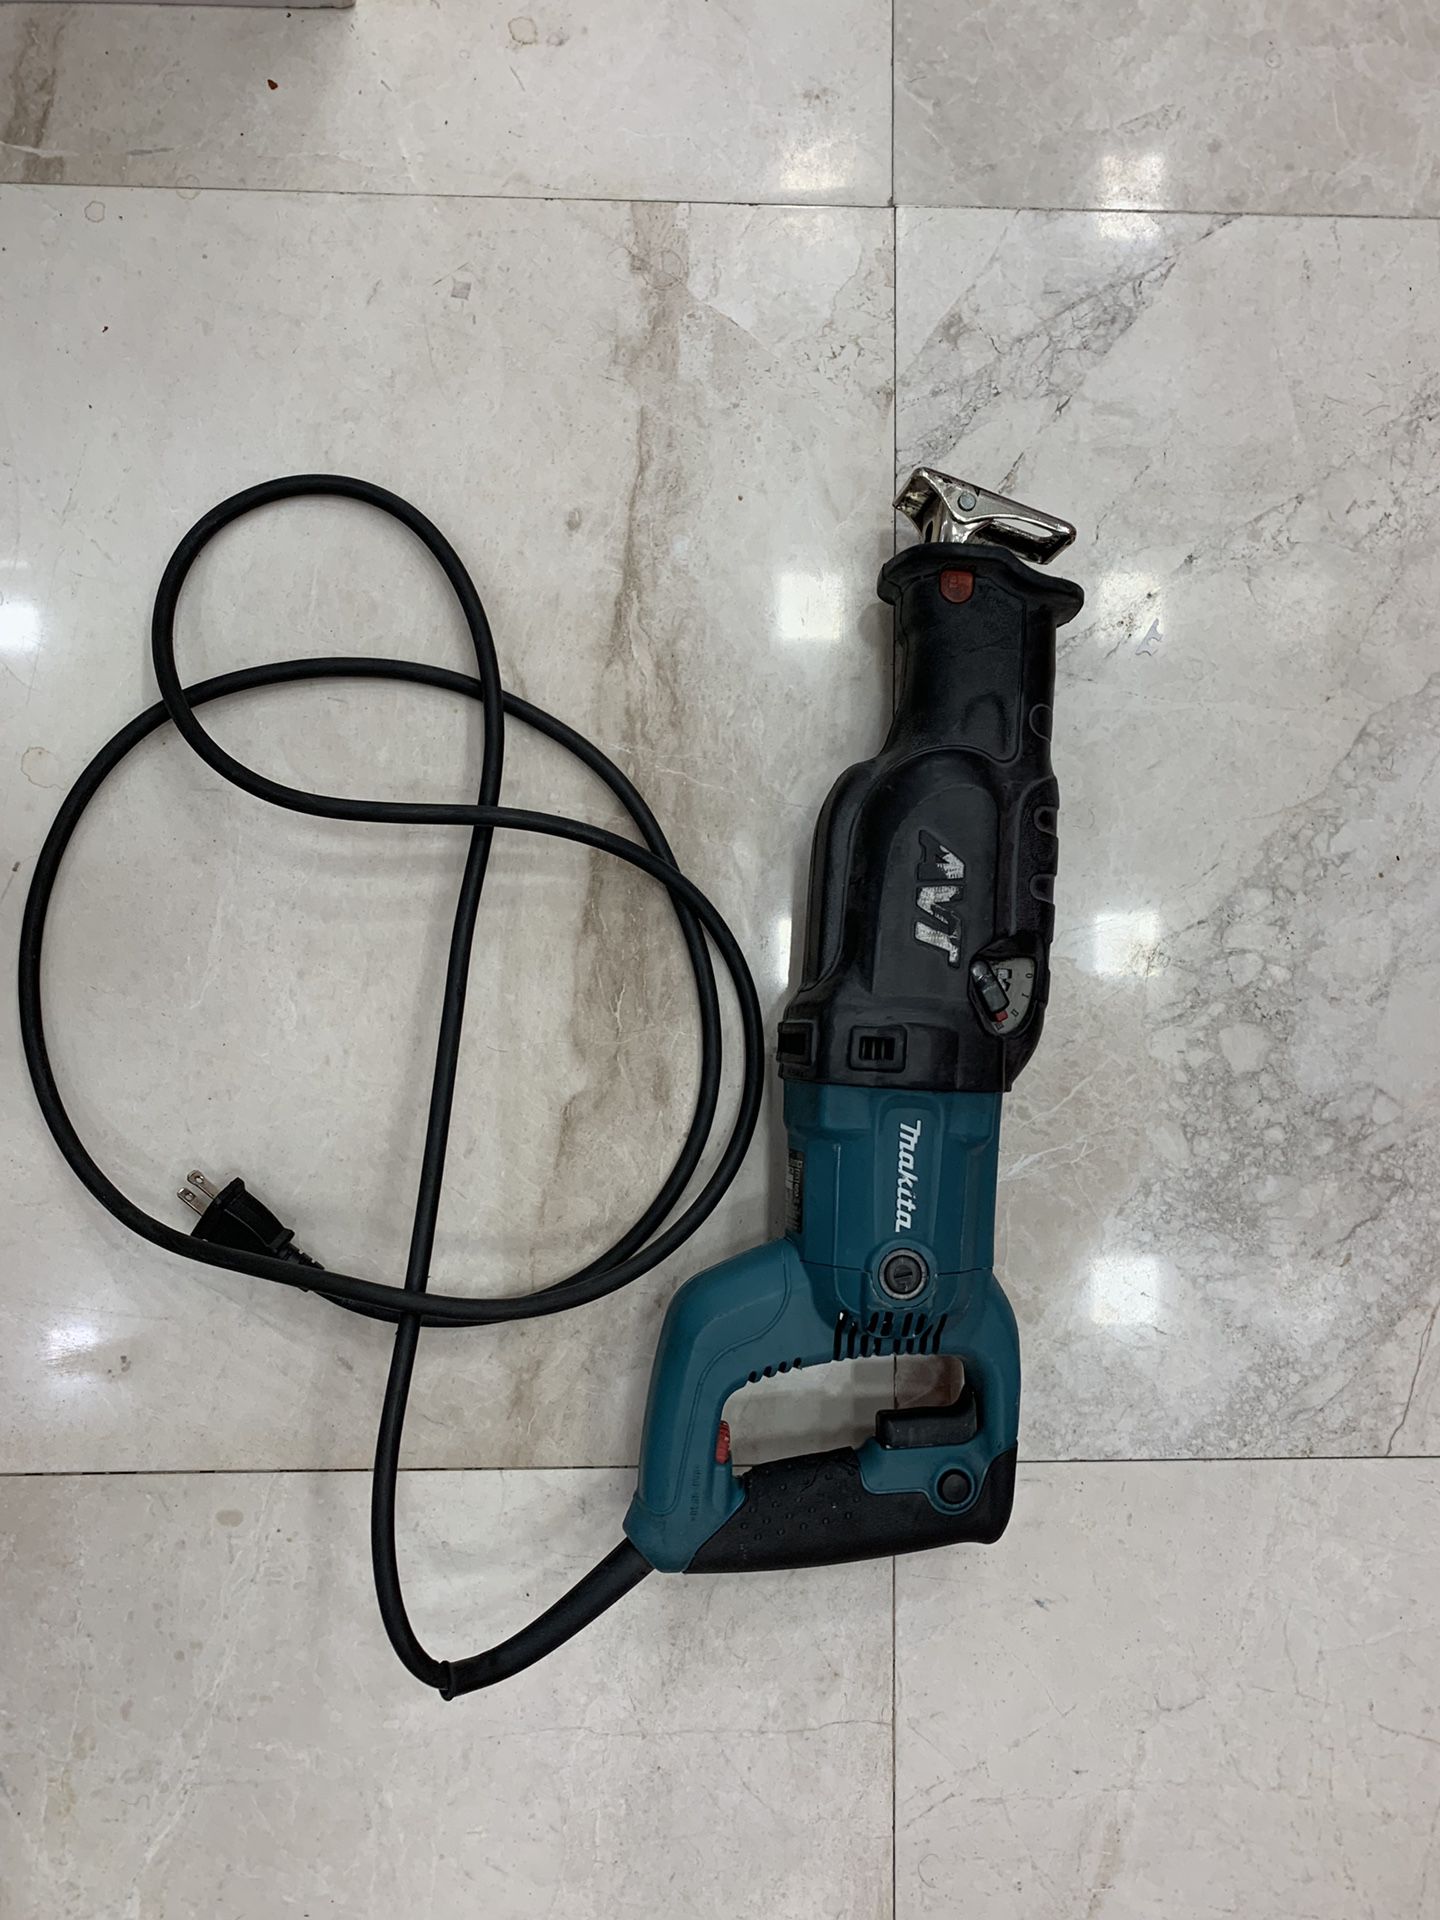 Makita Reciprocating saw (Sawzall). Works perfectly. Generally good aesthetic condition.